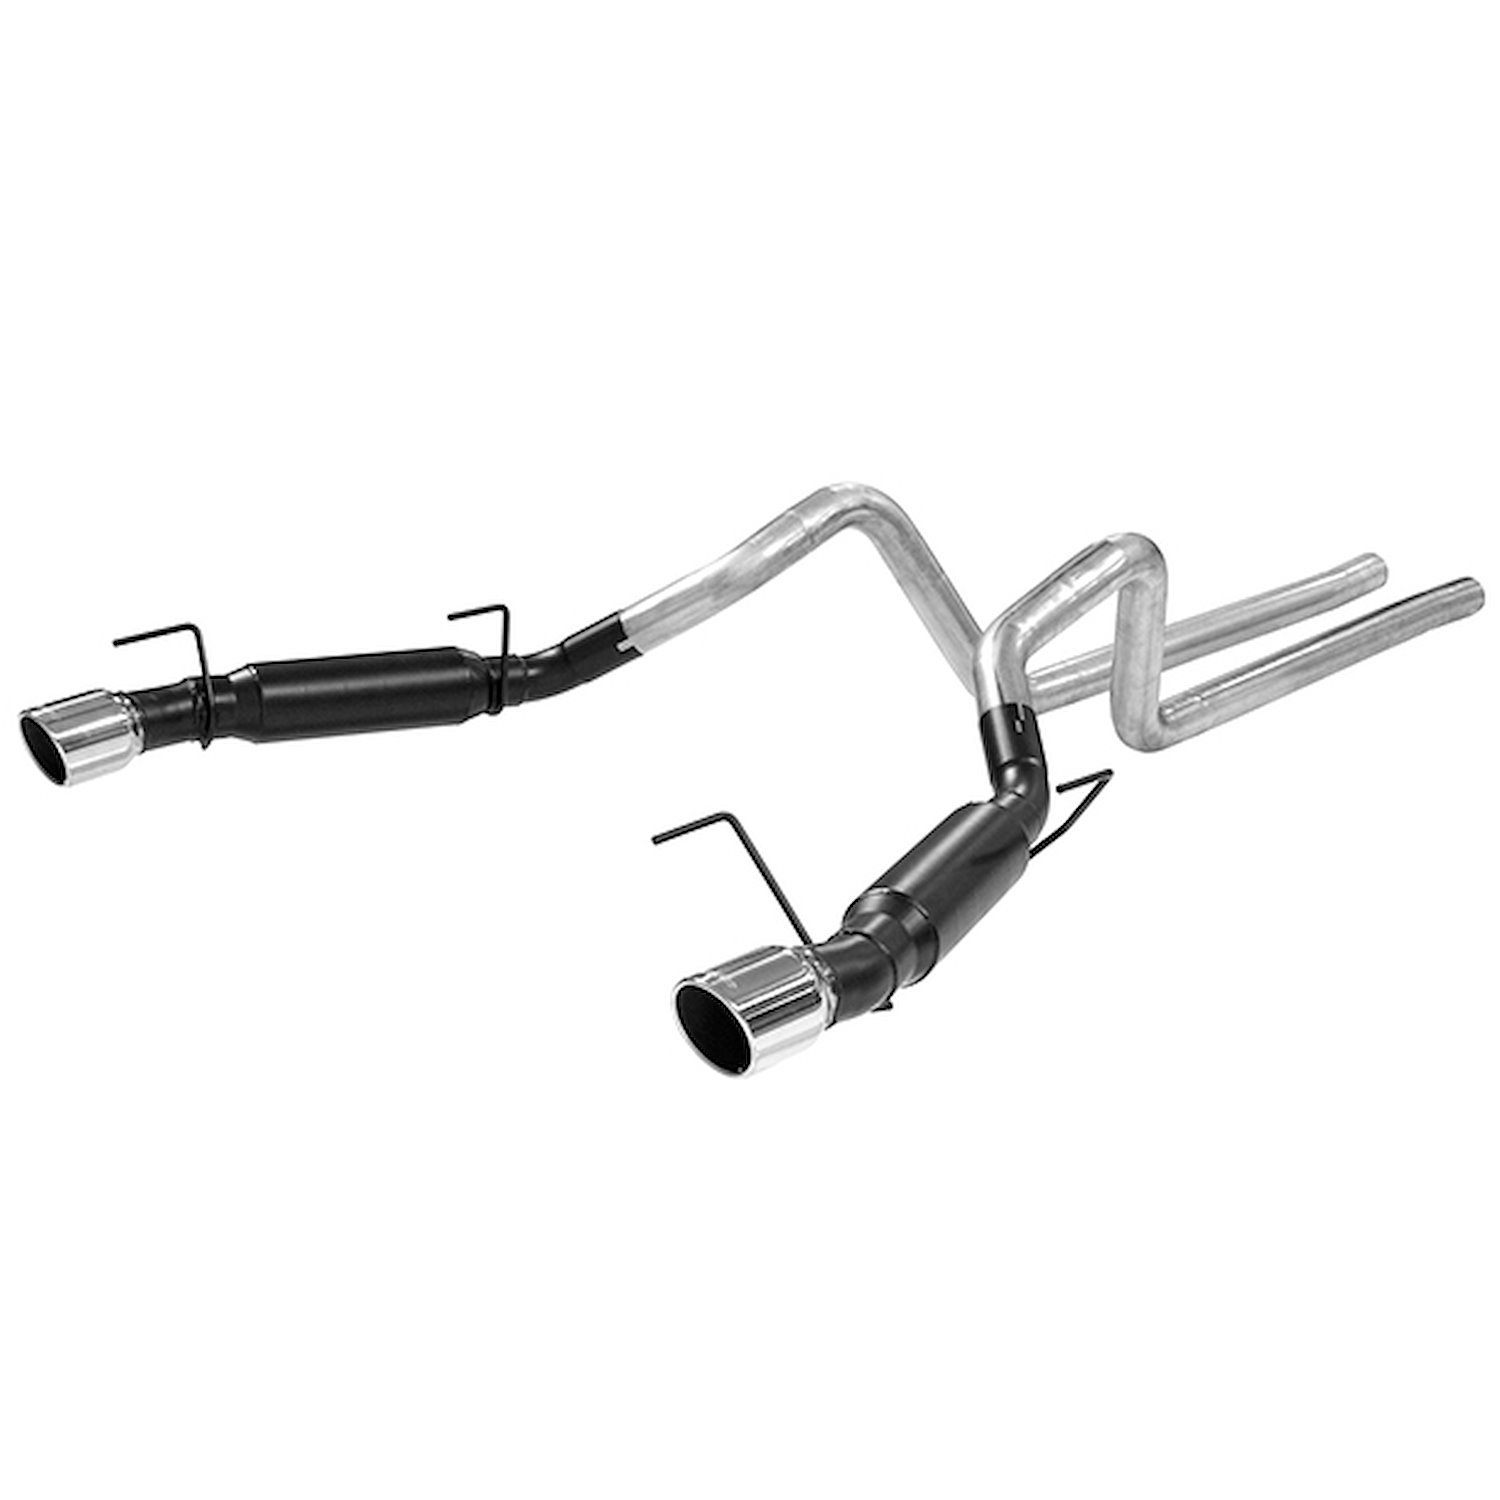 Outlaw Series Cat-Back Exhaust System 2005-2010 Ford Mustang GT 4.6/5.4L V8